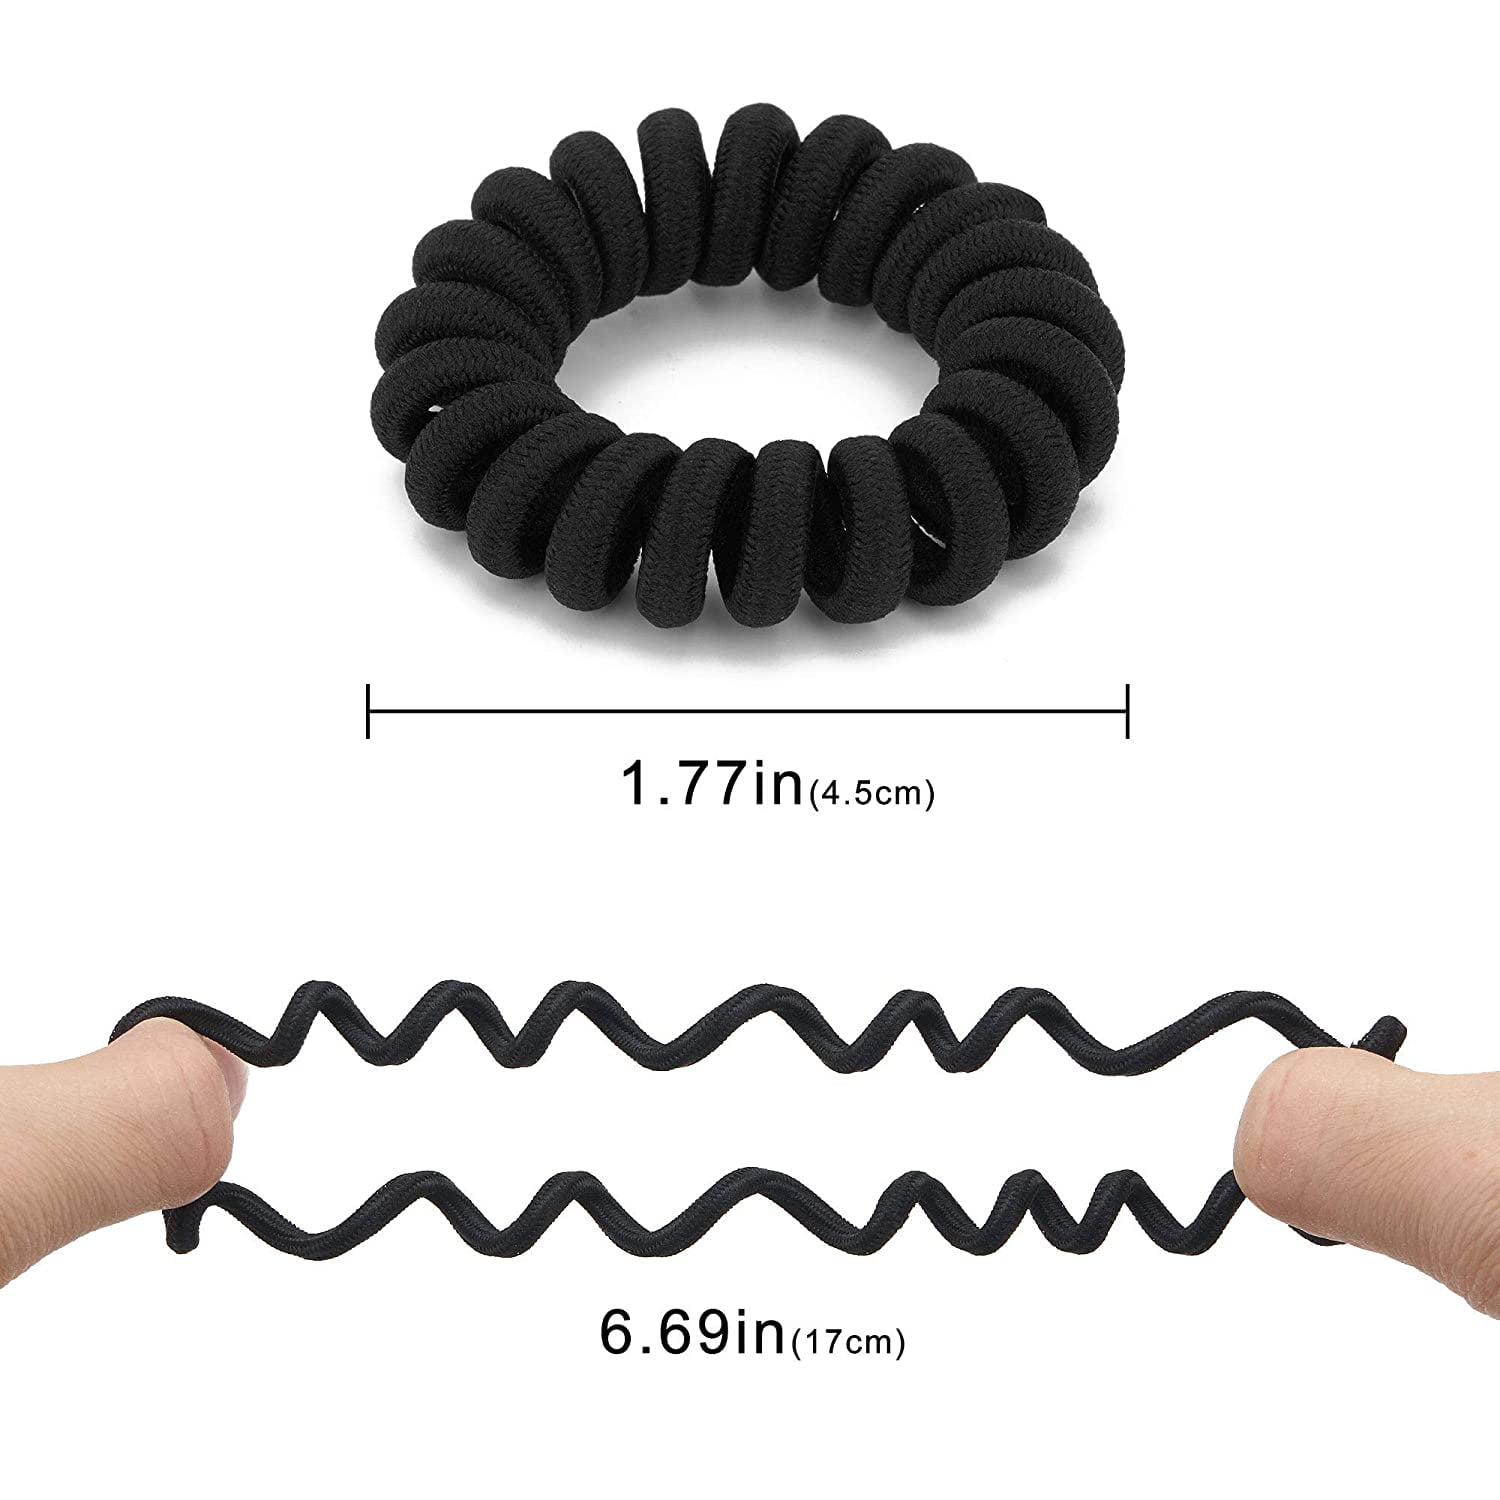 Ruisita 12 Pack Spiral Hair Ties Stretchy Traceless Hair Ties No Damage Hair Band Coil Bands Ponytail Holders Suitable for All Hair Types 